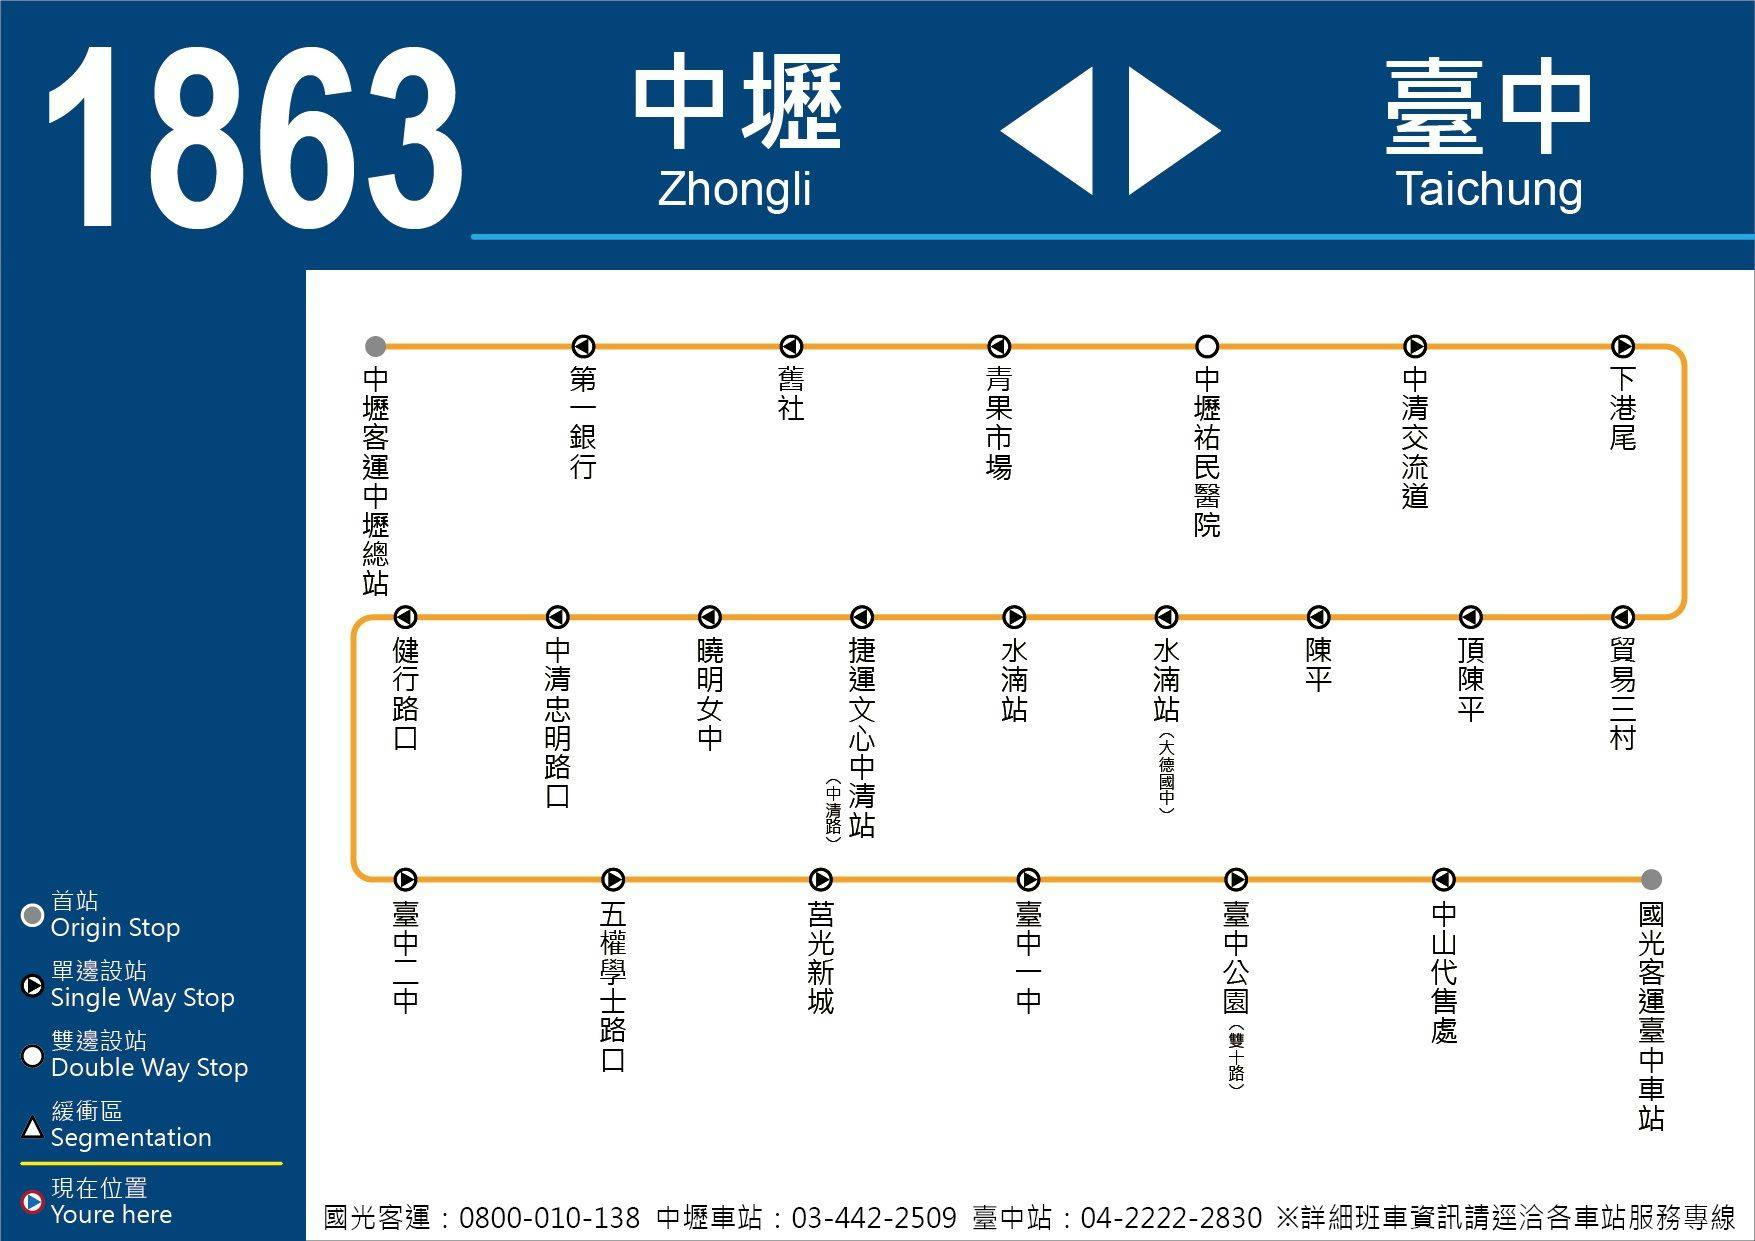 1863Route Map-Kuo-Kuang Bus